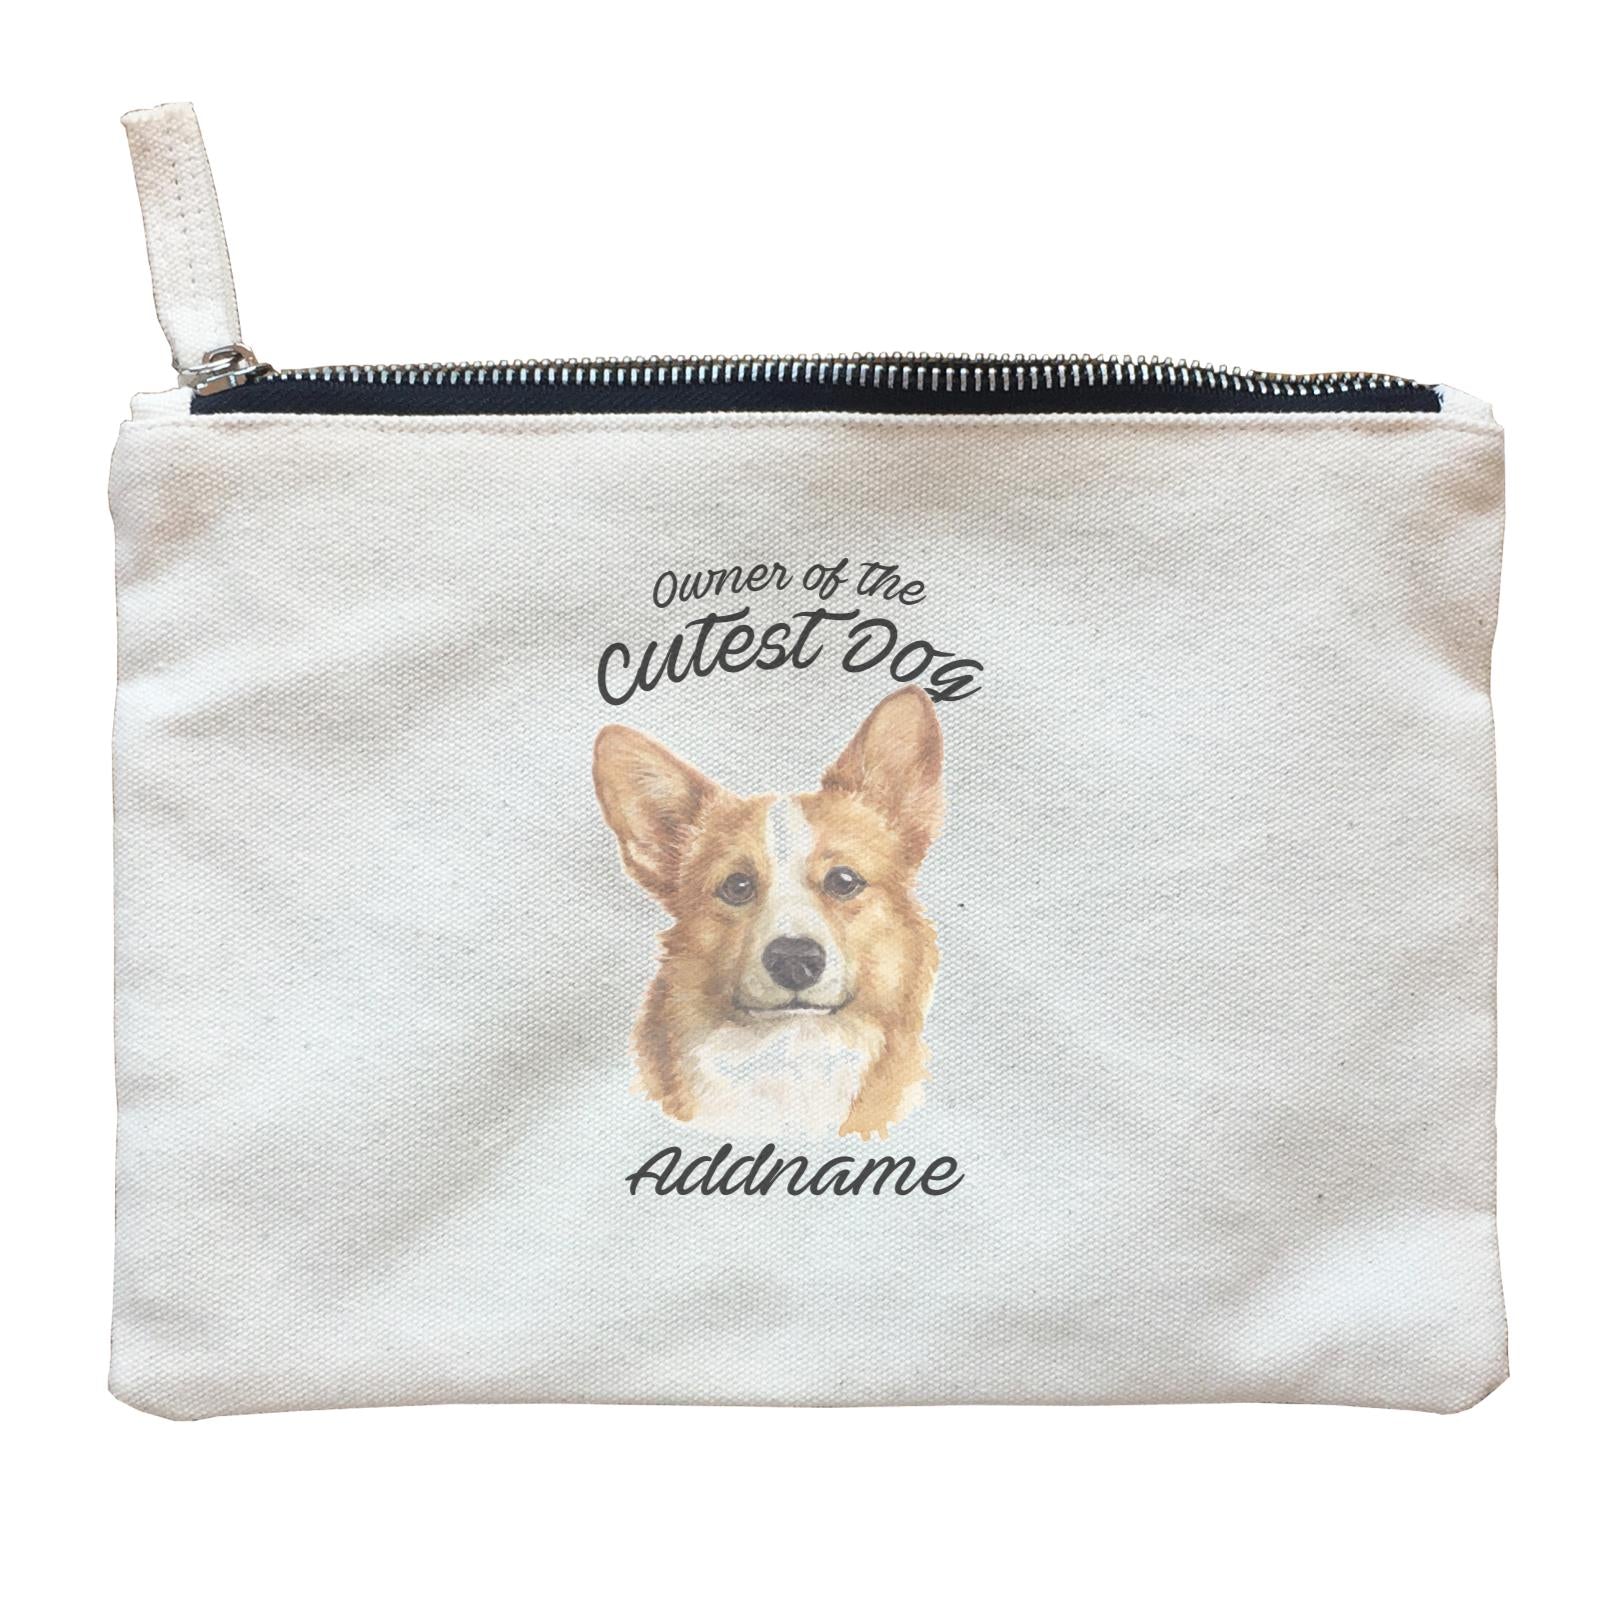 Watercolor Dog Owner Of The Cutest Dog Welsh Corgi Addname Zipper Pouch